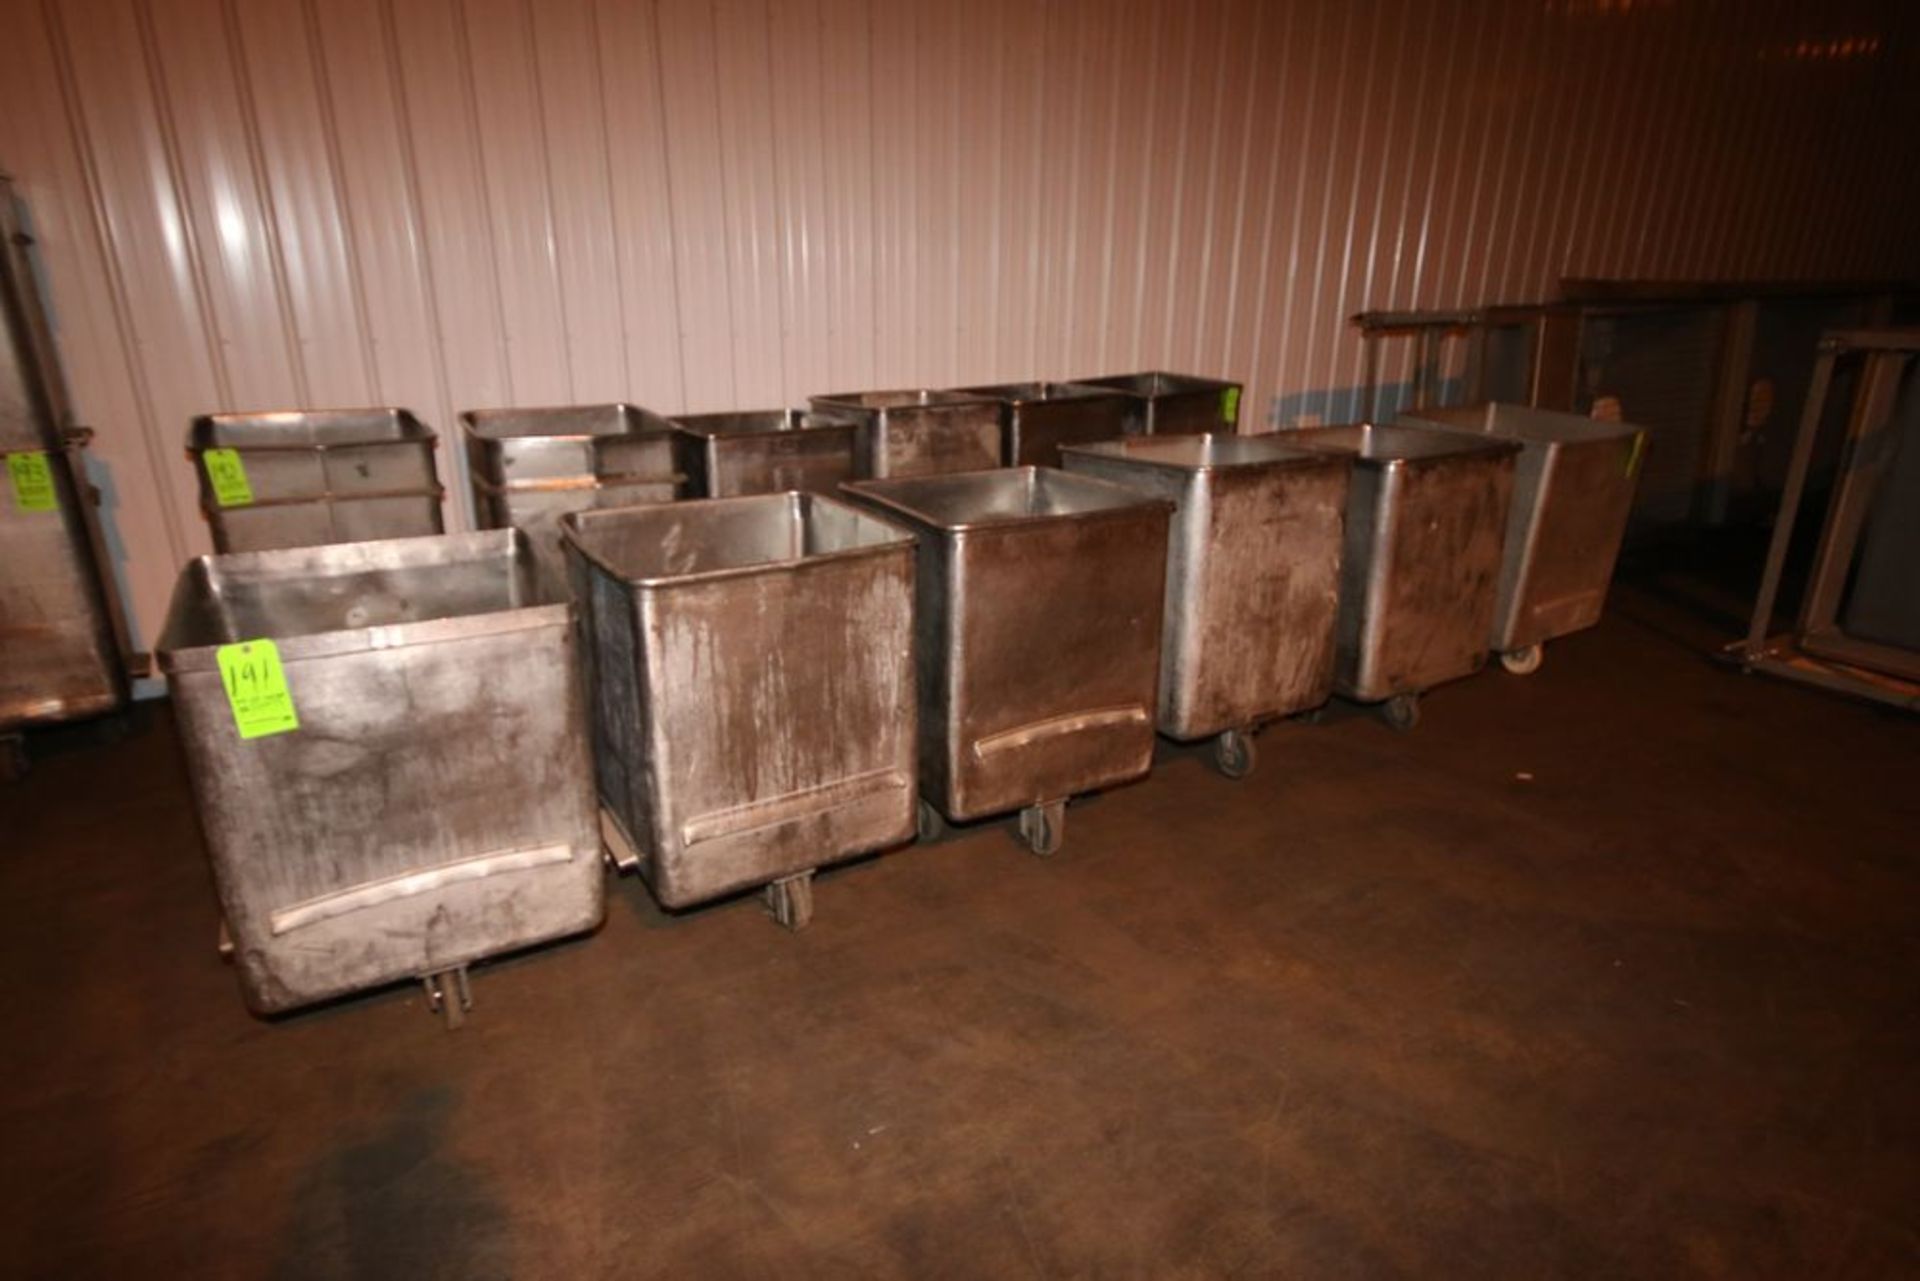 S/S Portable Totes, Internal Dims.: Aprox. 25-1/2" L x 25" W x 30" Deep (LOCATED IN BROCKPORT,